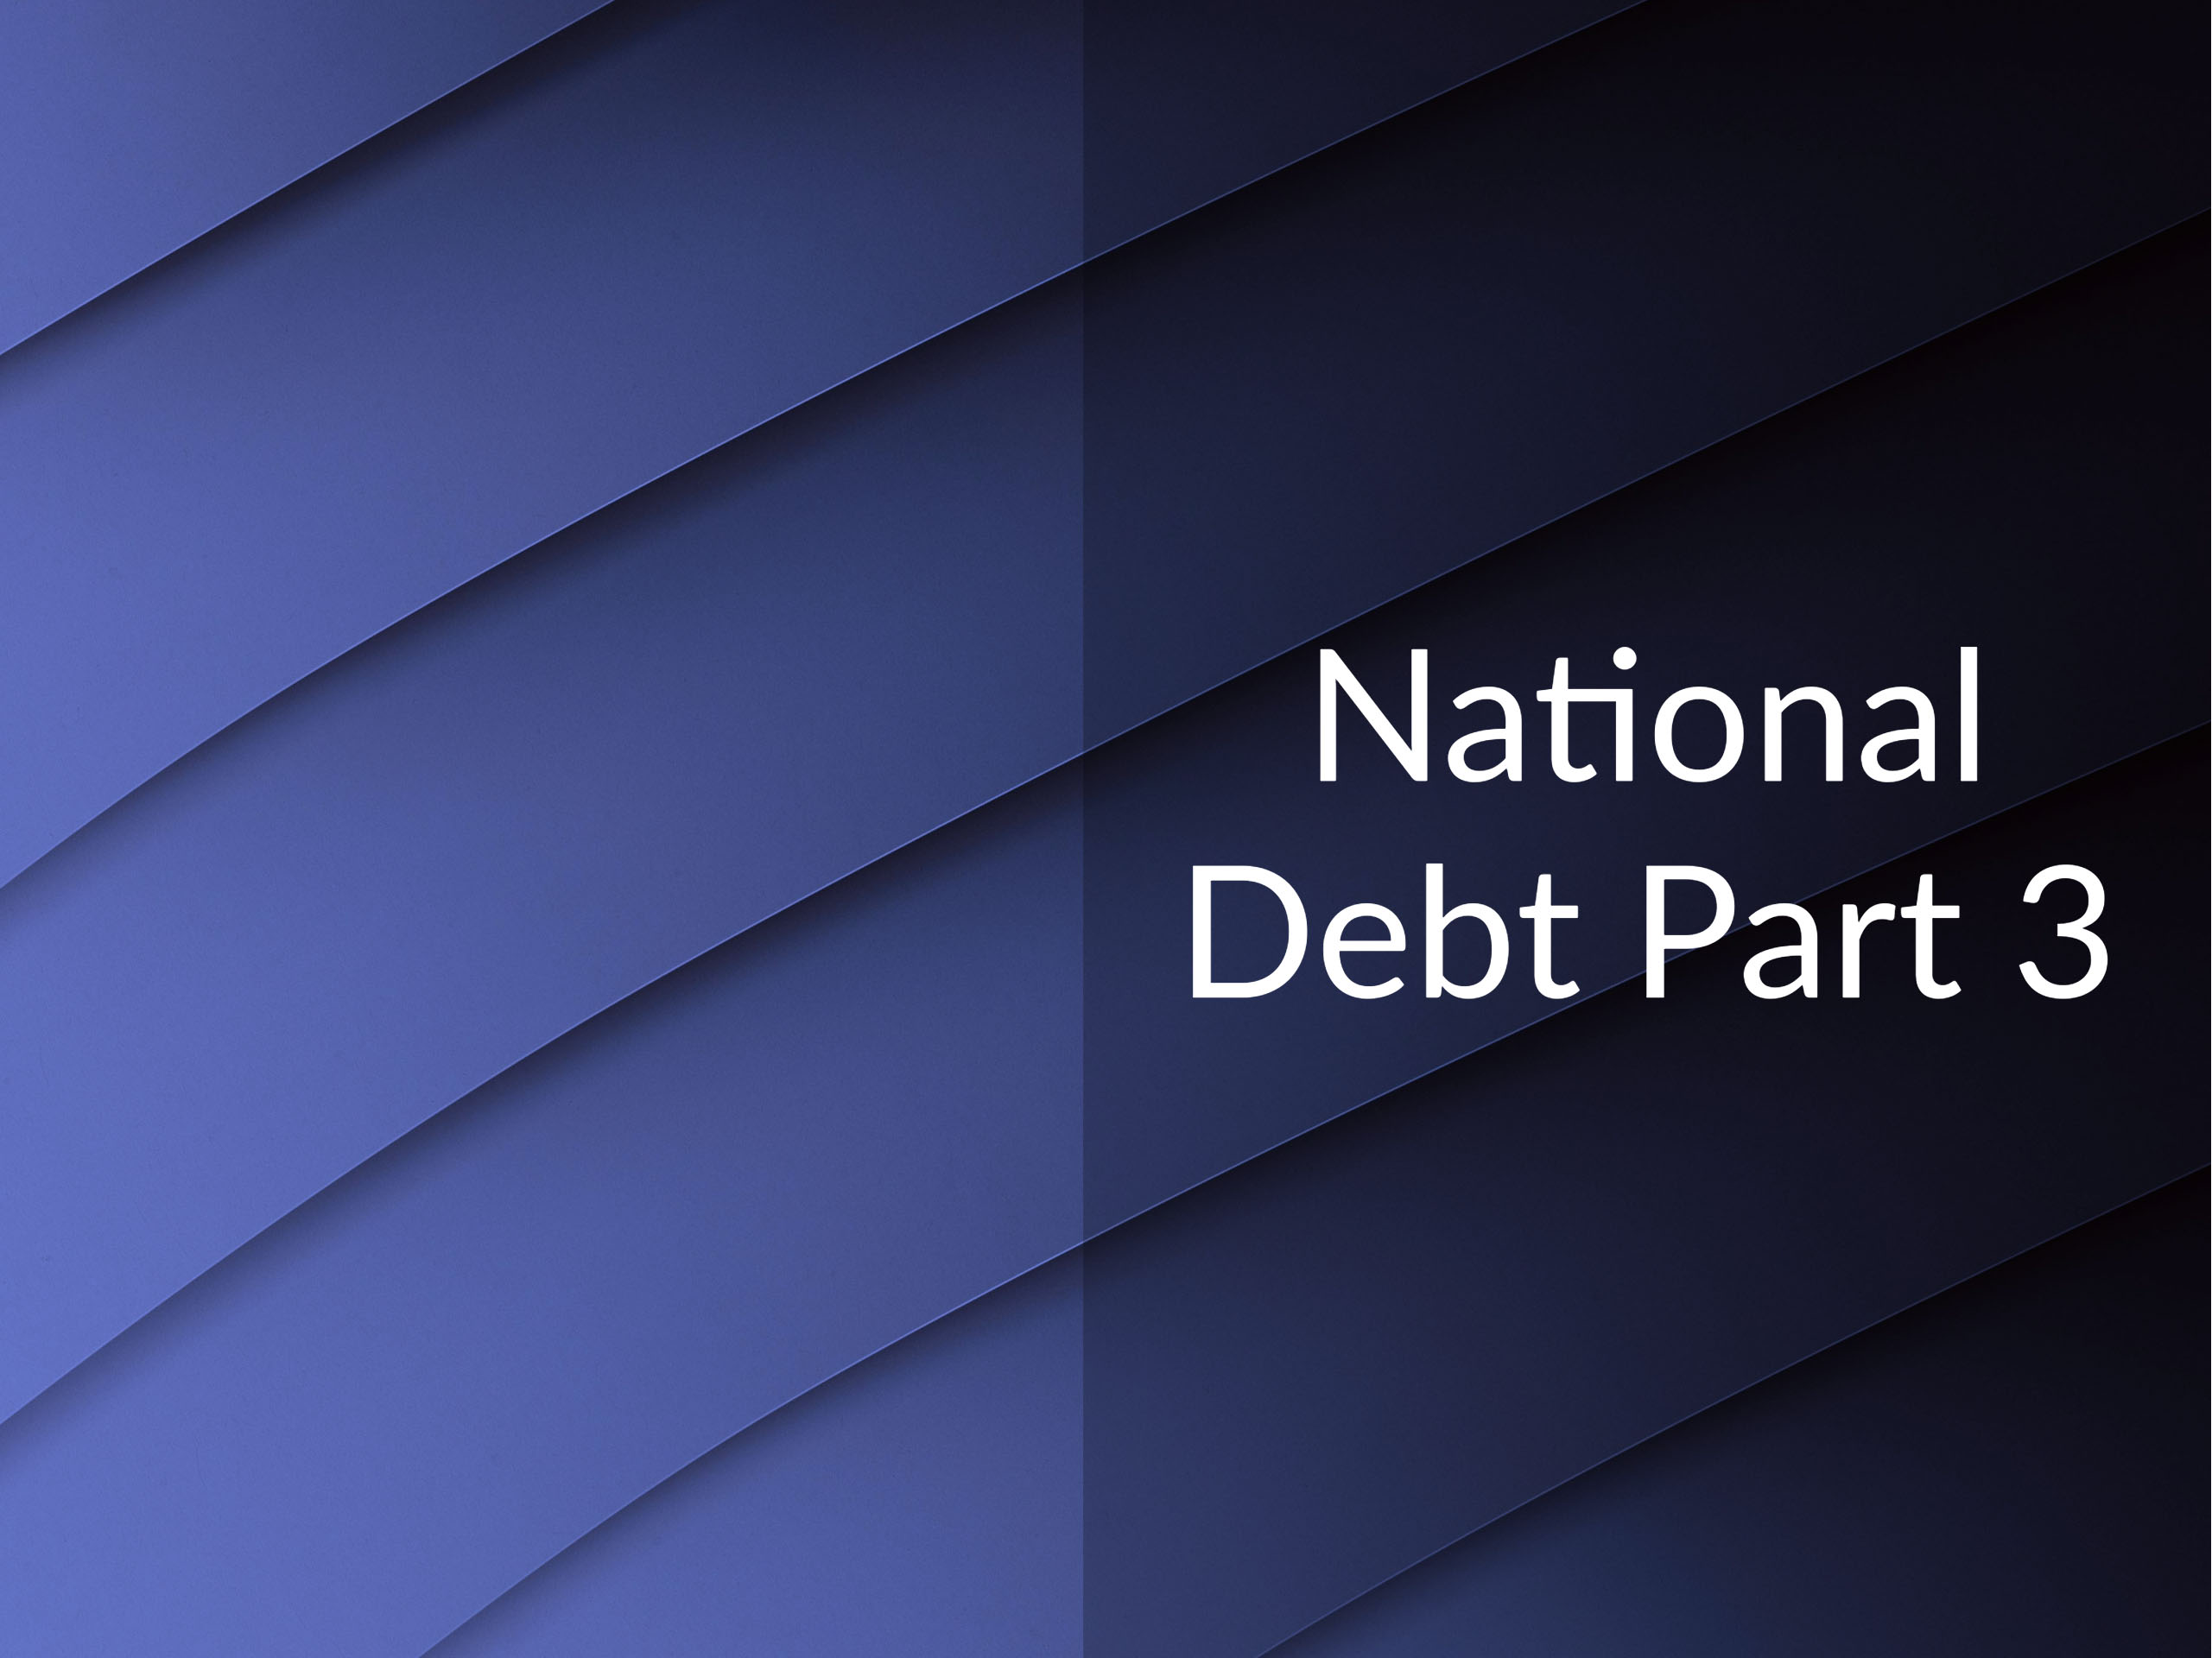 Abstract architecture with the caption "National Debt Part 3"